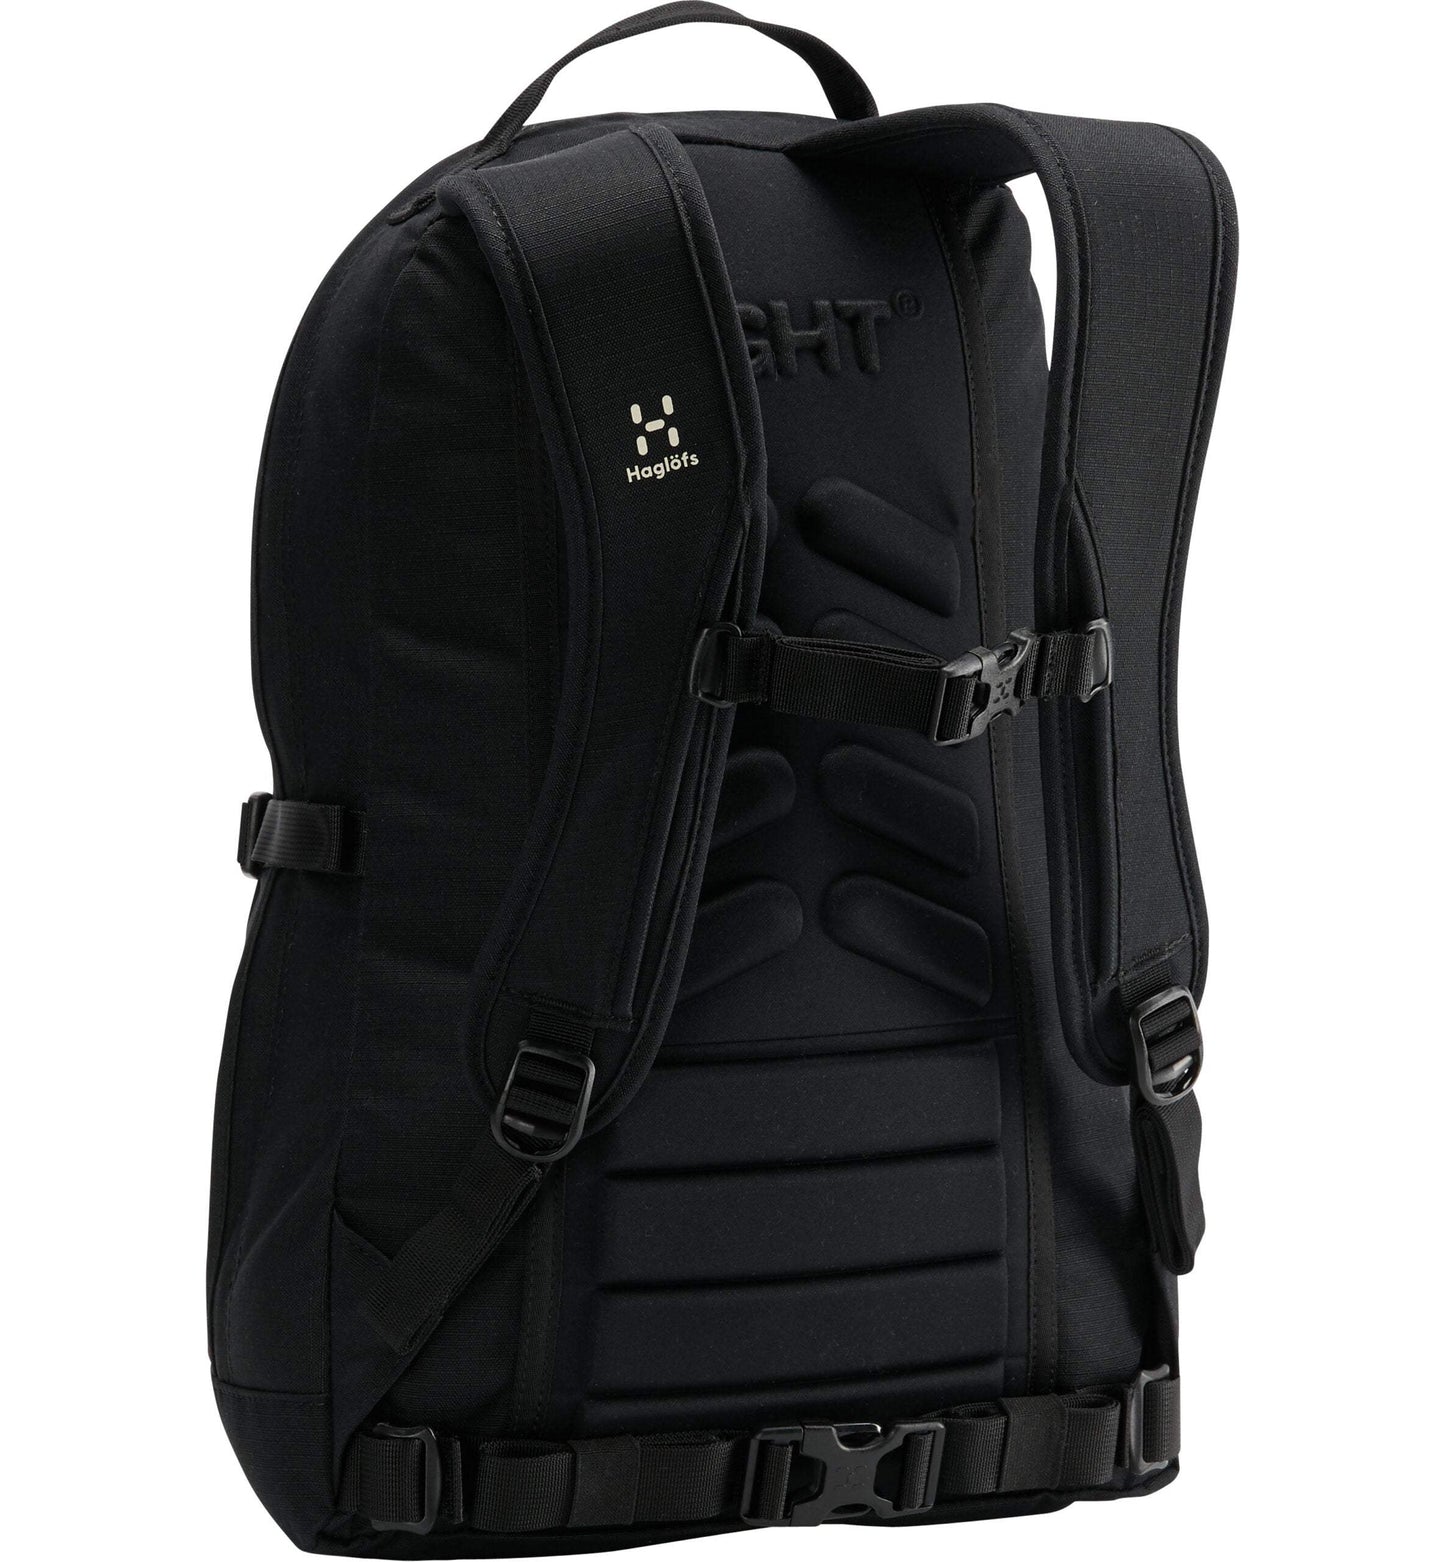 Tight Daypack by Haglofs - The Luxury Promotional Gifts Company Limited